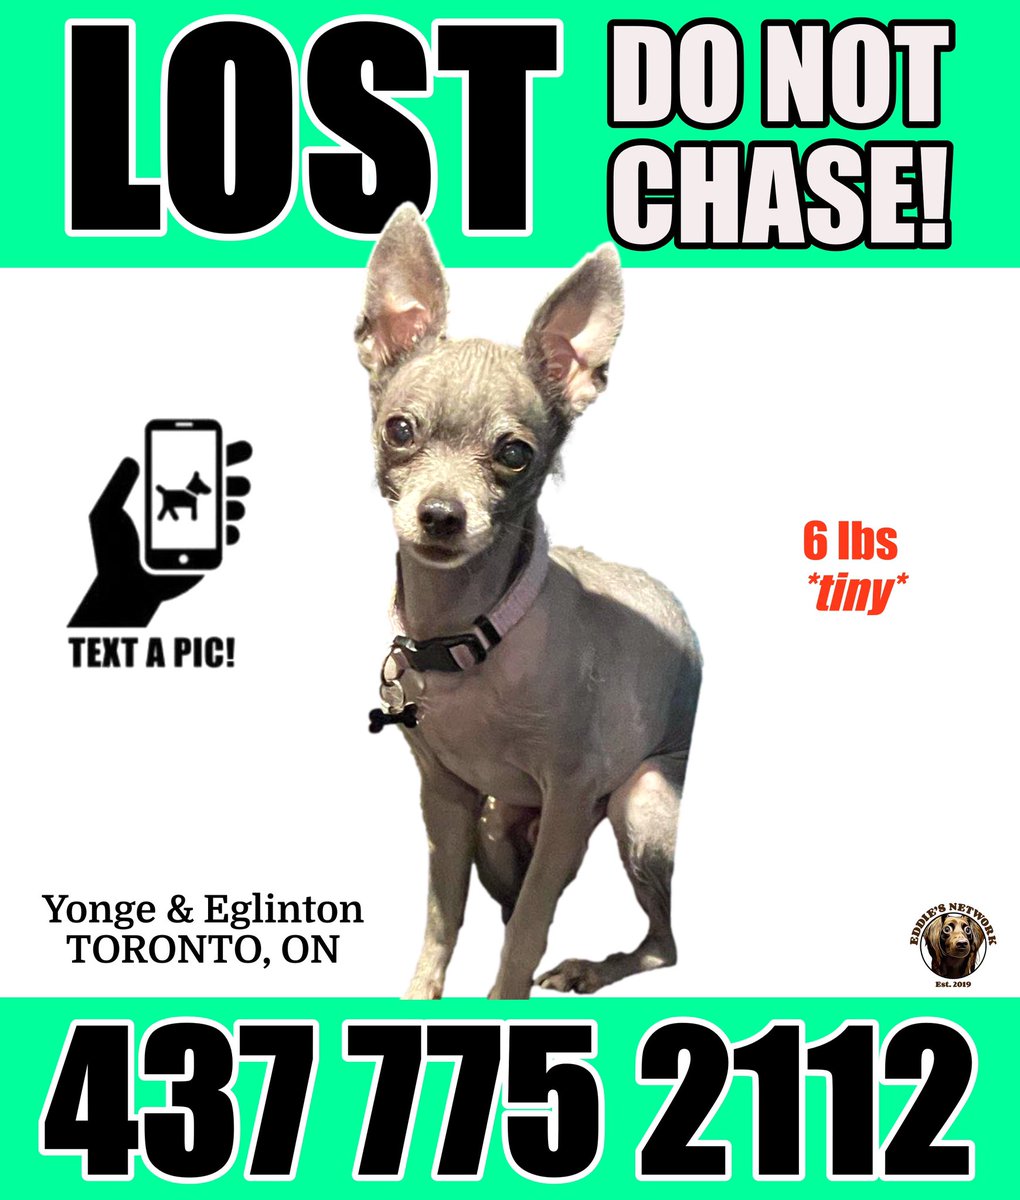 LOST DOG #Yonge #Eglinton #Toronto

If seen, please do not approach, chase or call out! Note the direction of travel, and call/text right away. Please, do not post sightings online. Missing since May 16, 2024.

#midtowntoronto #torontoontario